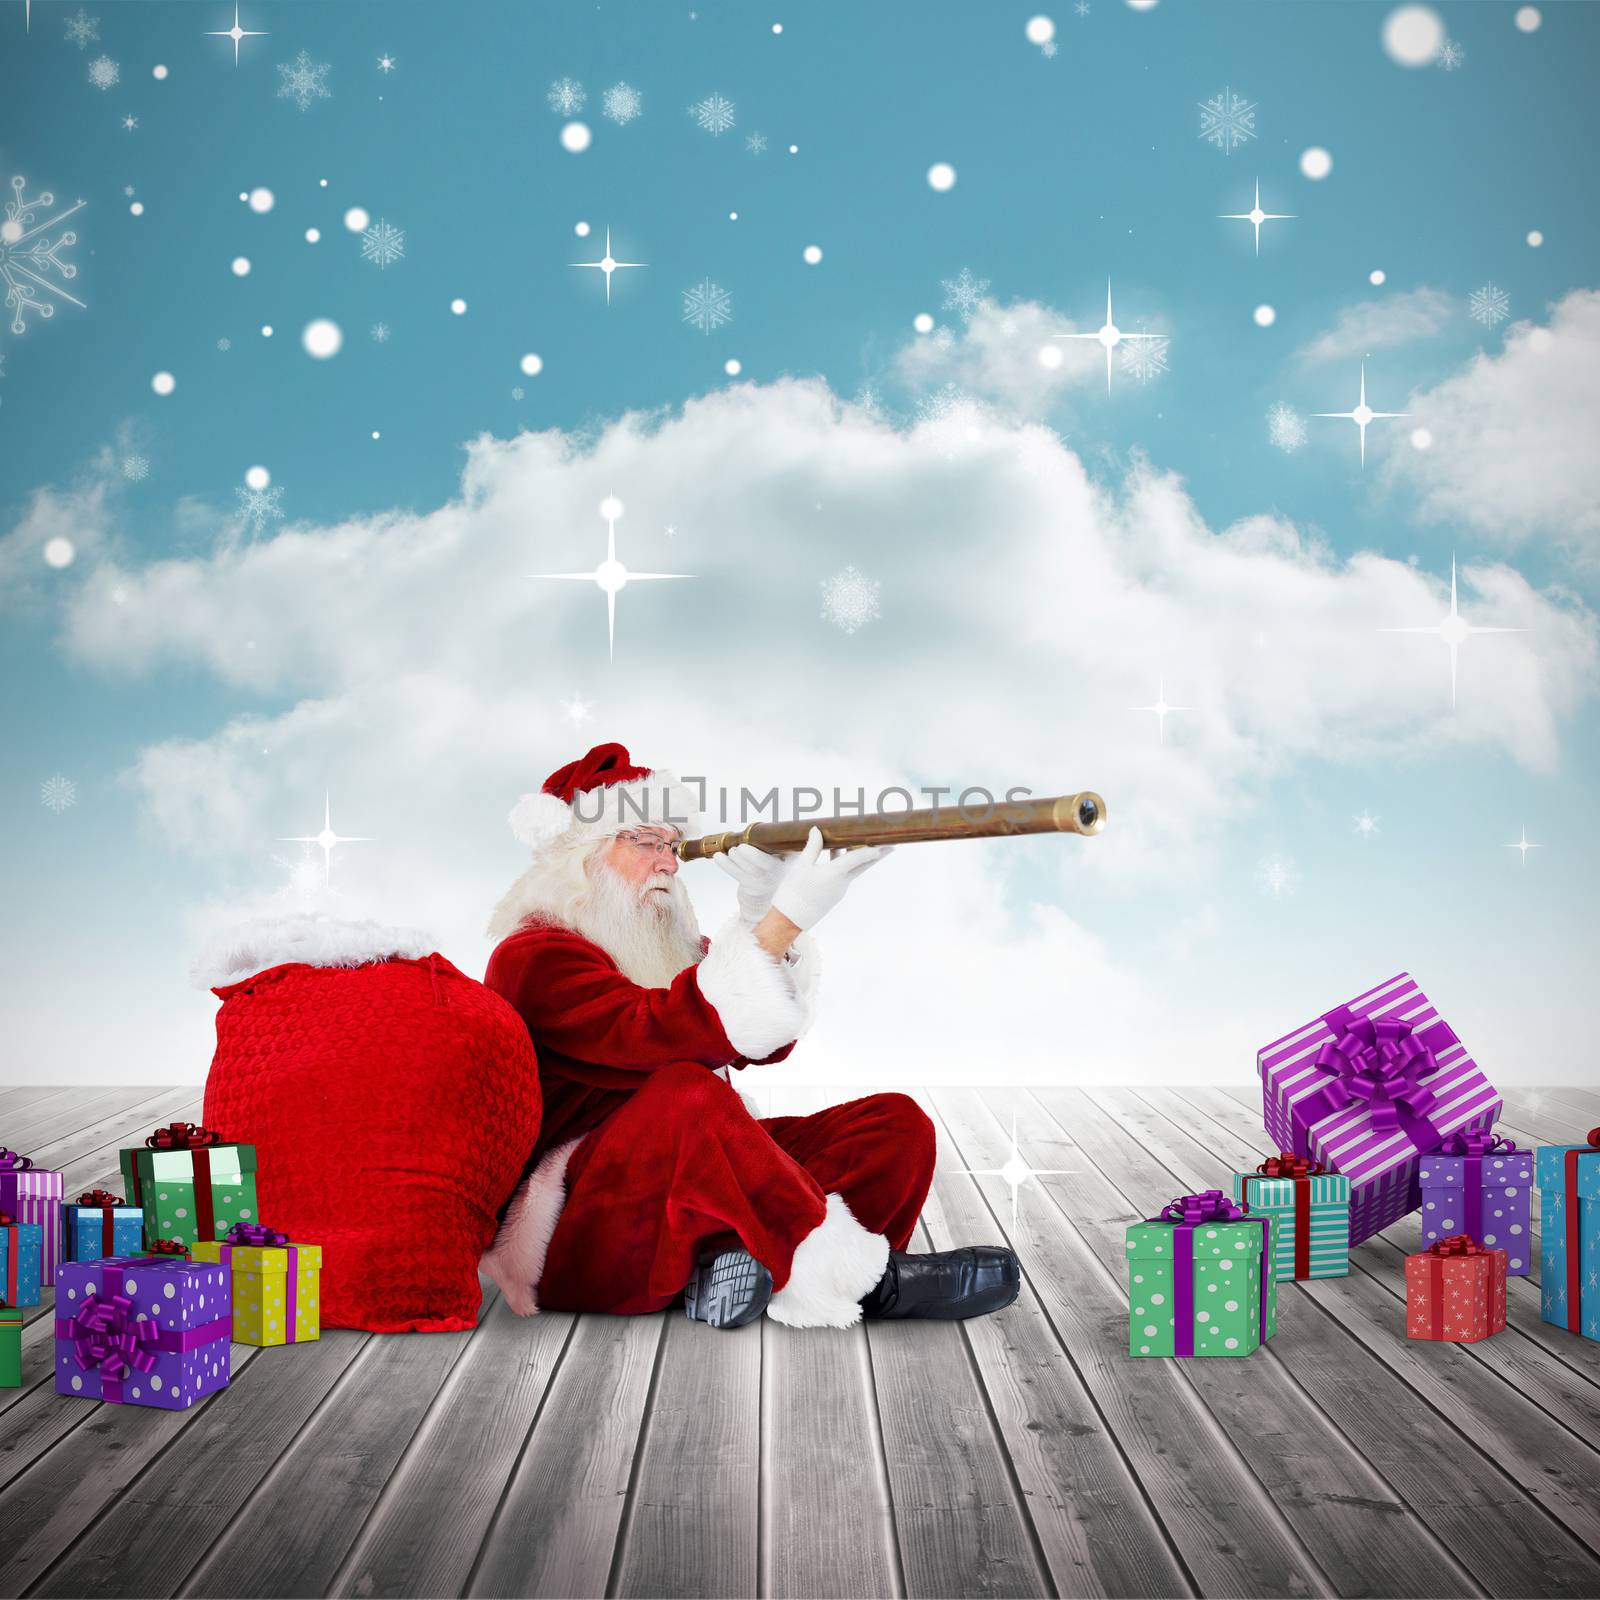 Santa looking through a telescope against cloudy sky background